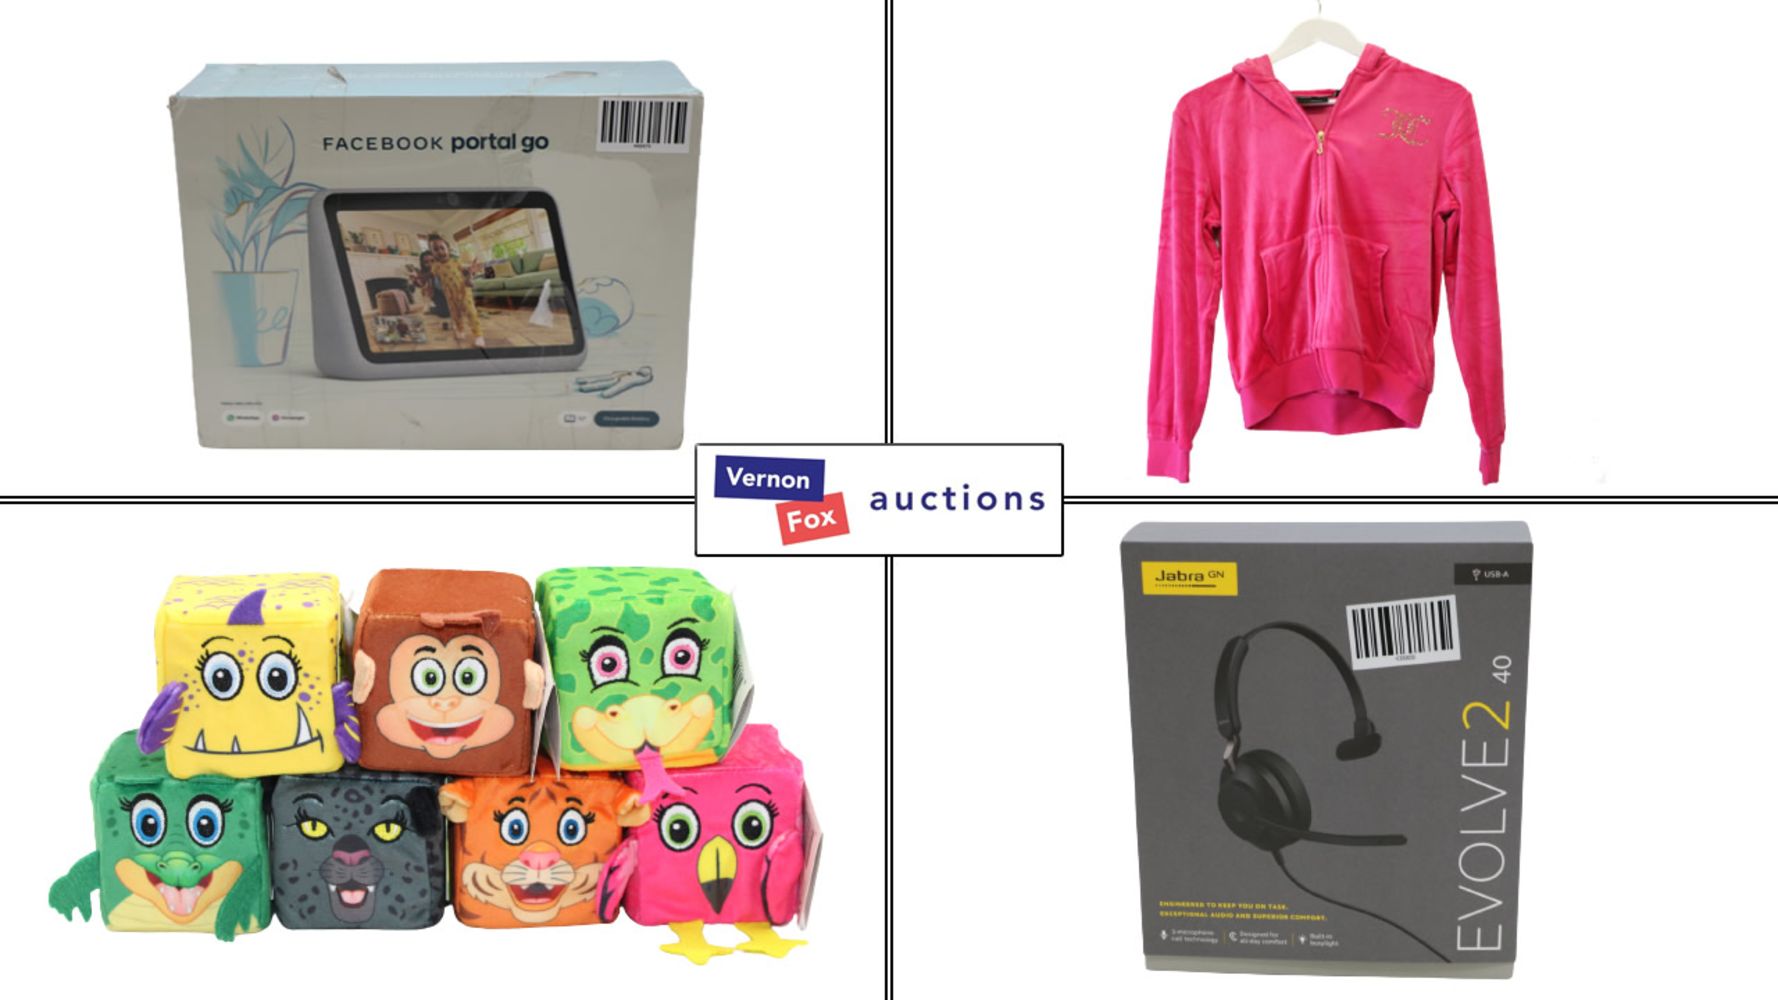 TIMED ONLINE AUCTION: Hats, Audio Equipment, Jewellery, Tools and other Commercial Goods, with FREE UK DELIVERY!